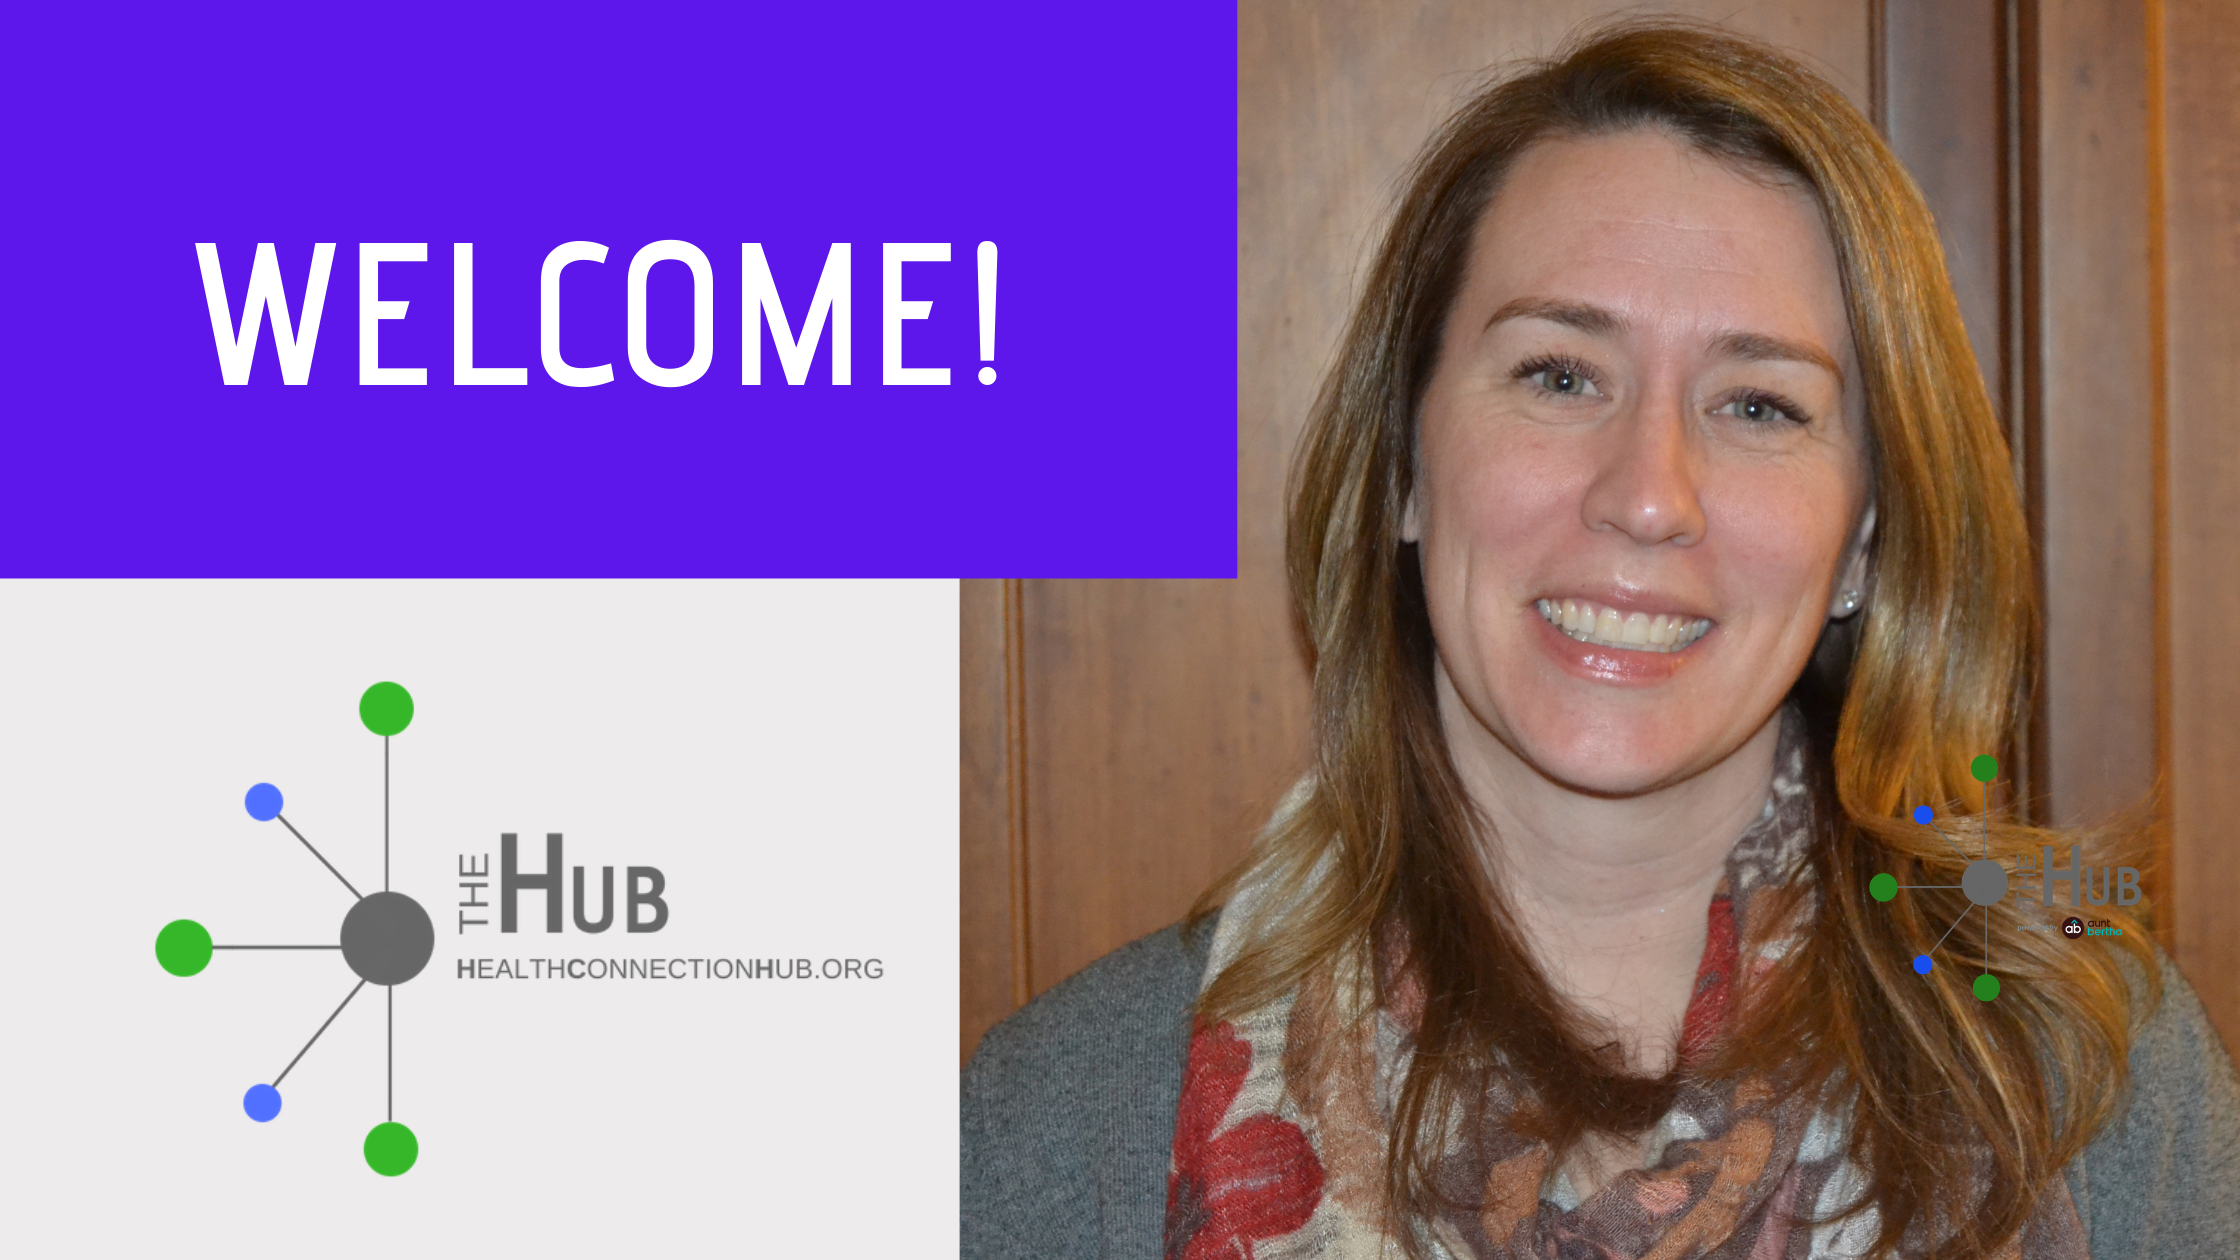 WELCOME TO THE HUB TEAM!